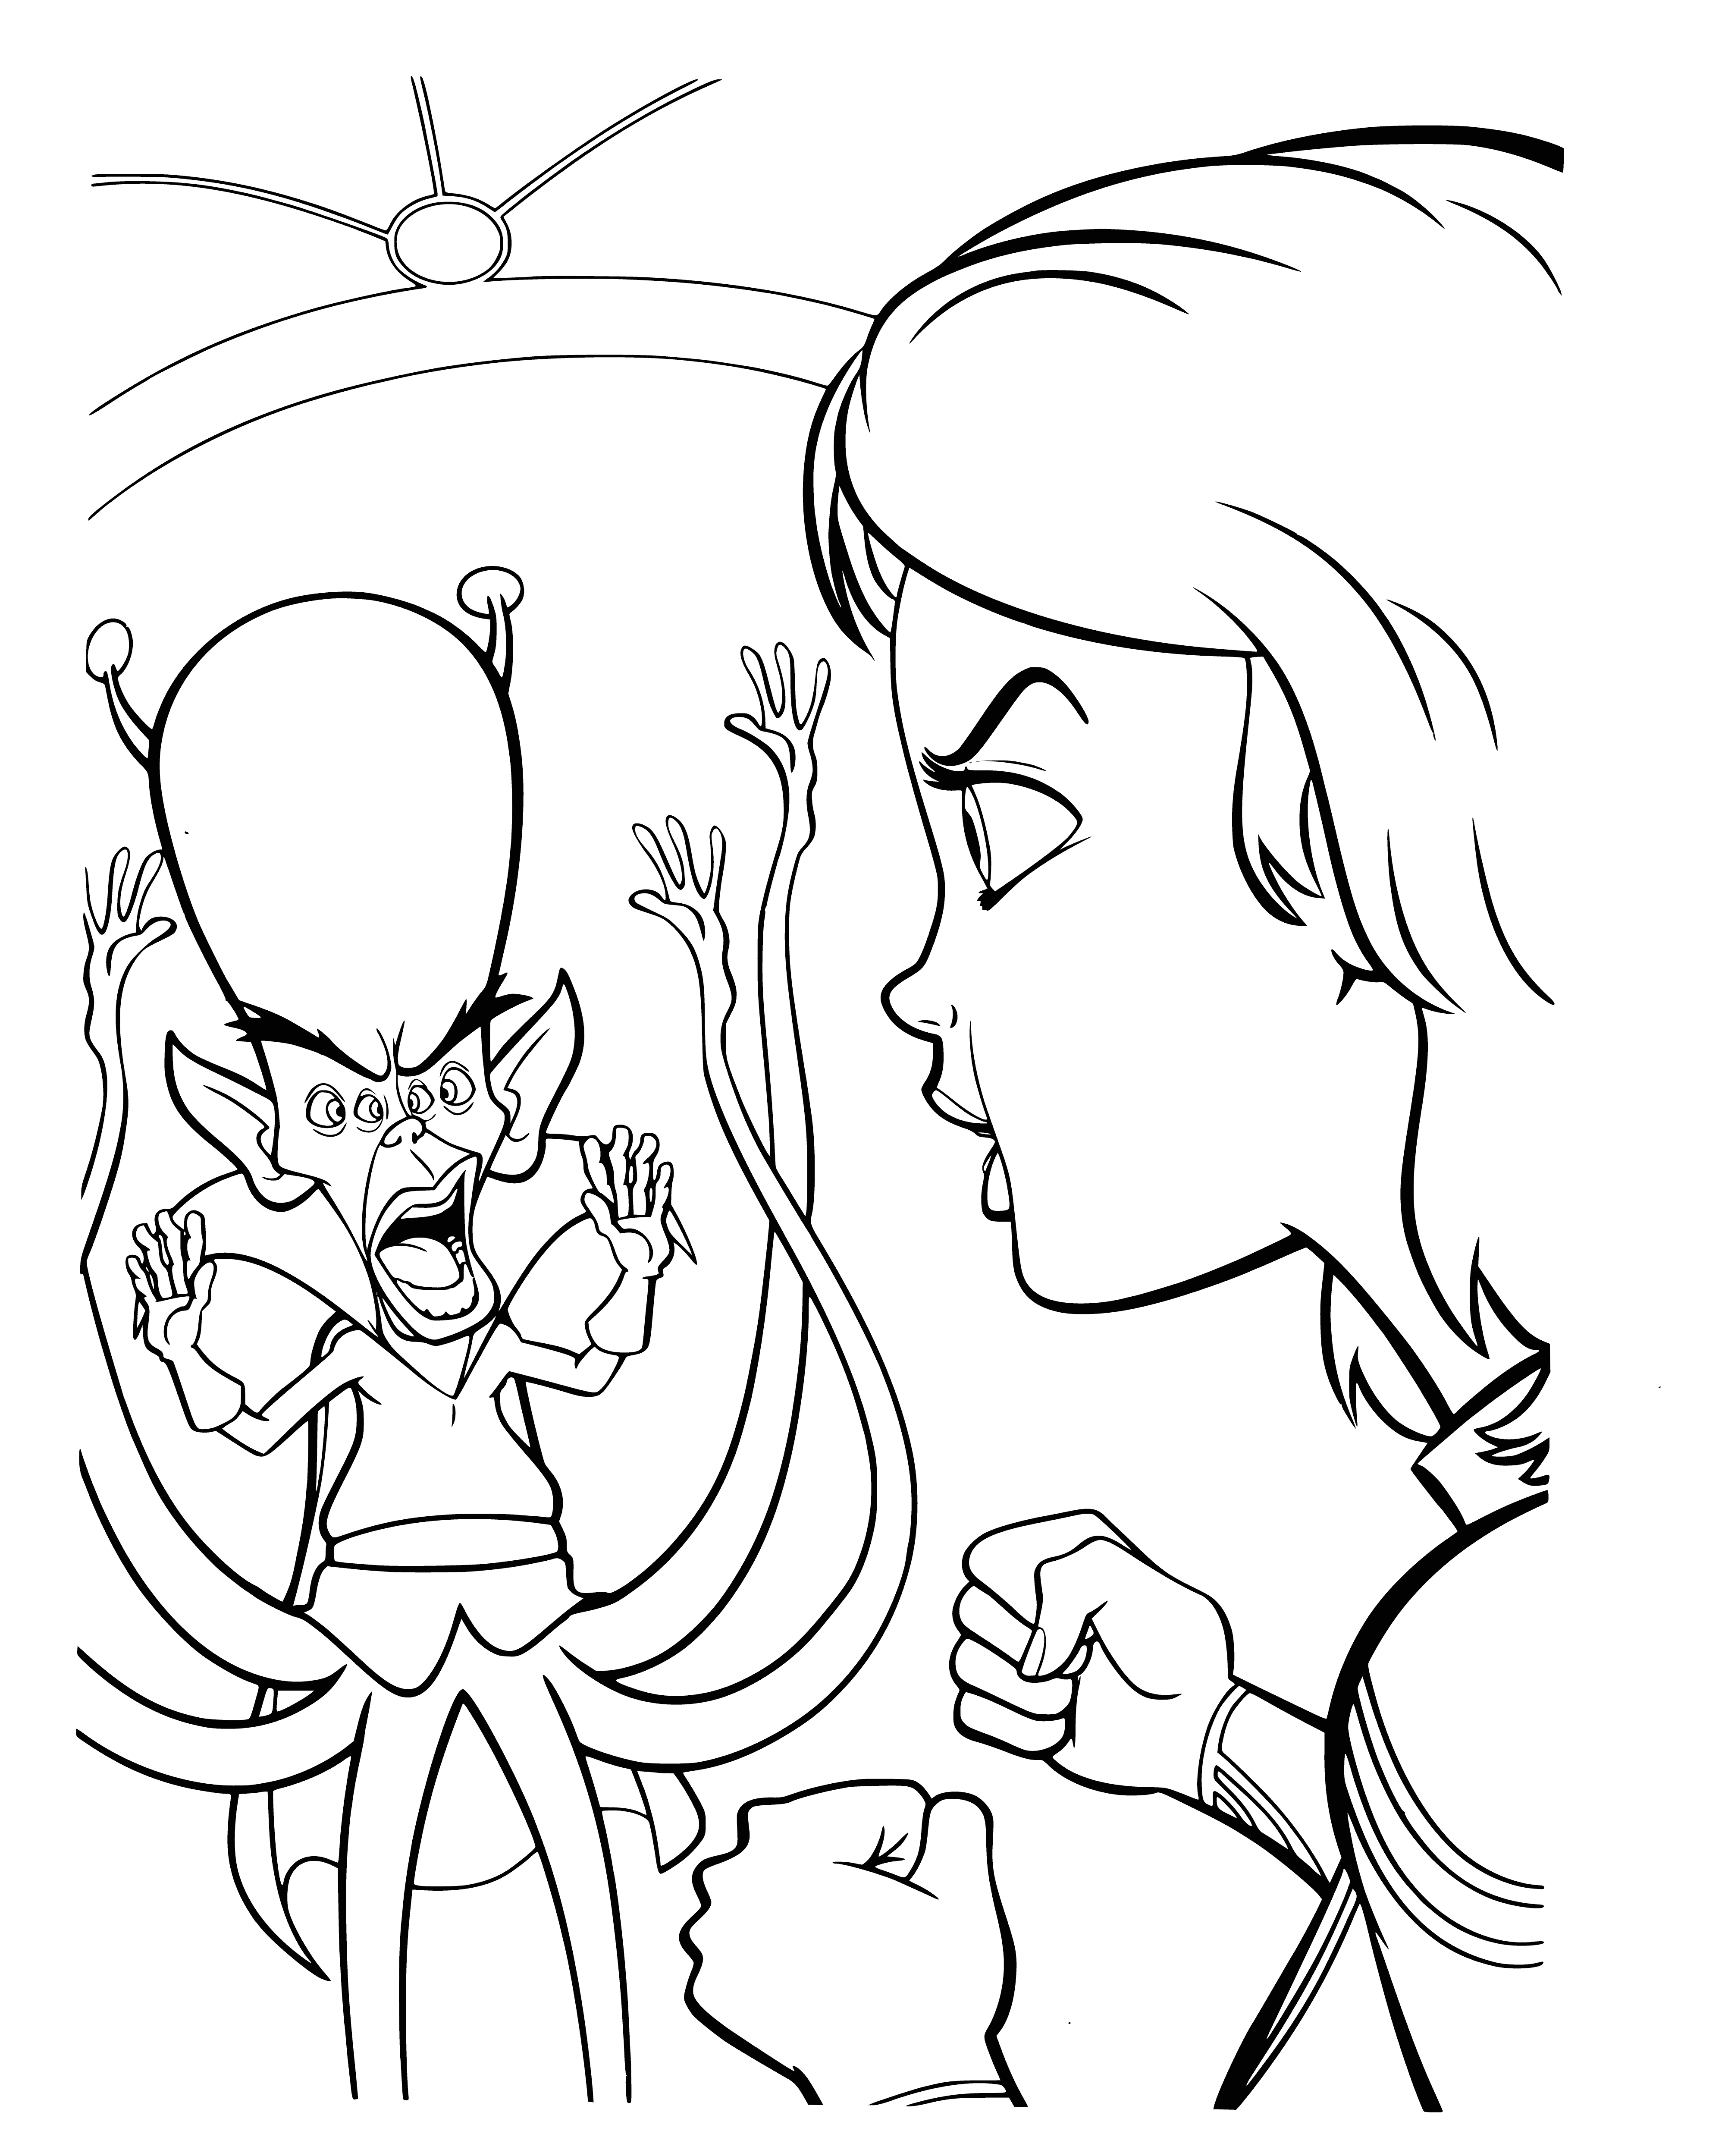 coloring page: Susan and Galactosar battle it out in 'Monsters Vs. Aliens'. They fight fiercely, but who will win?